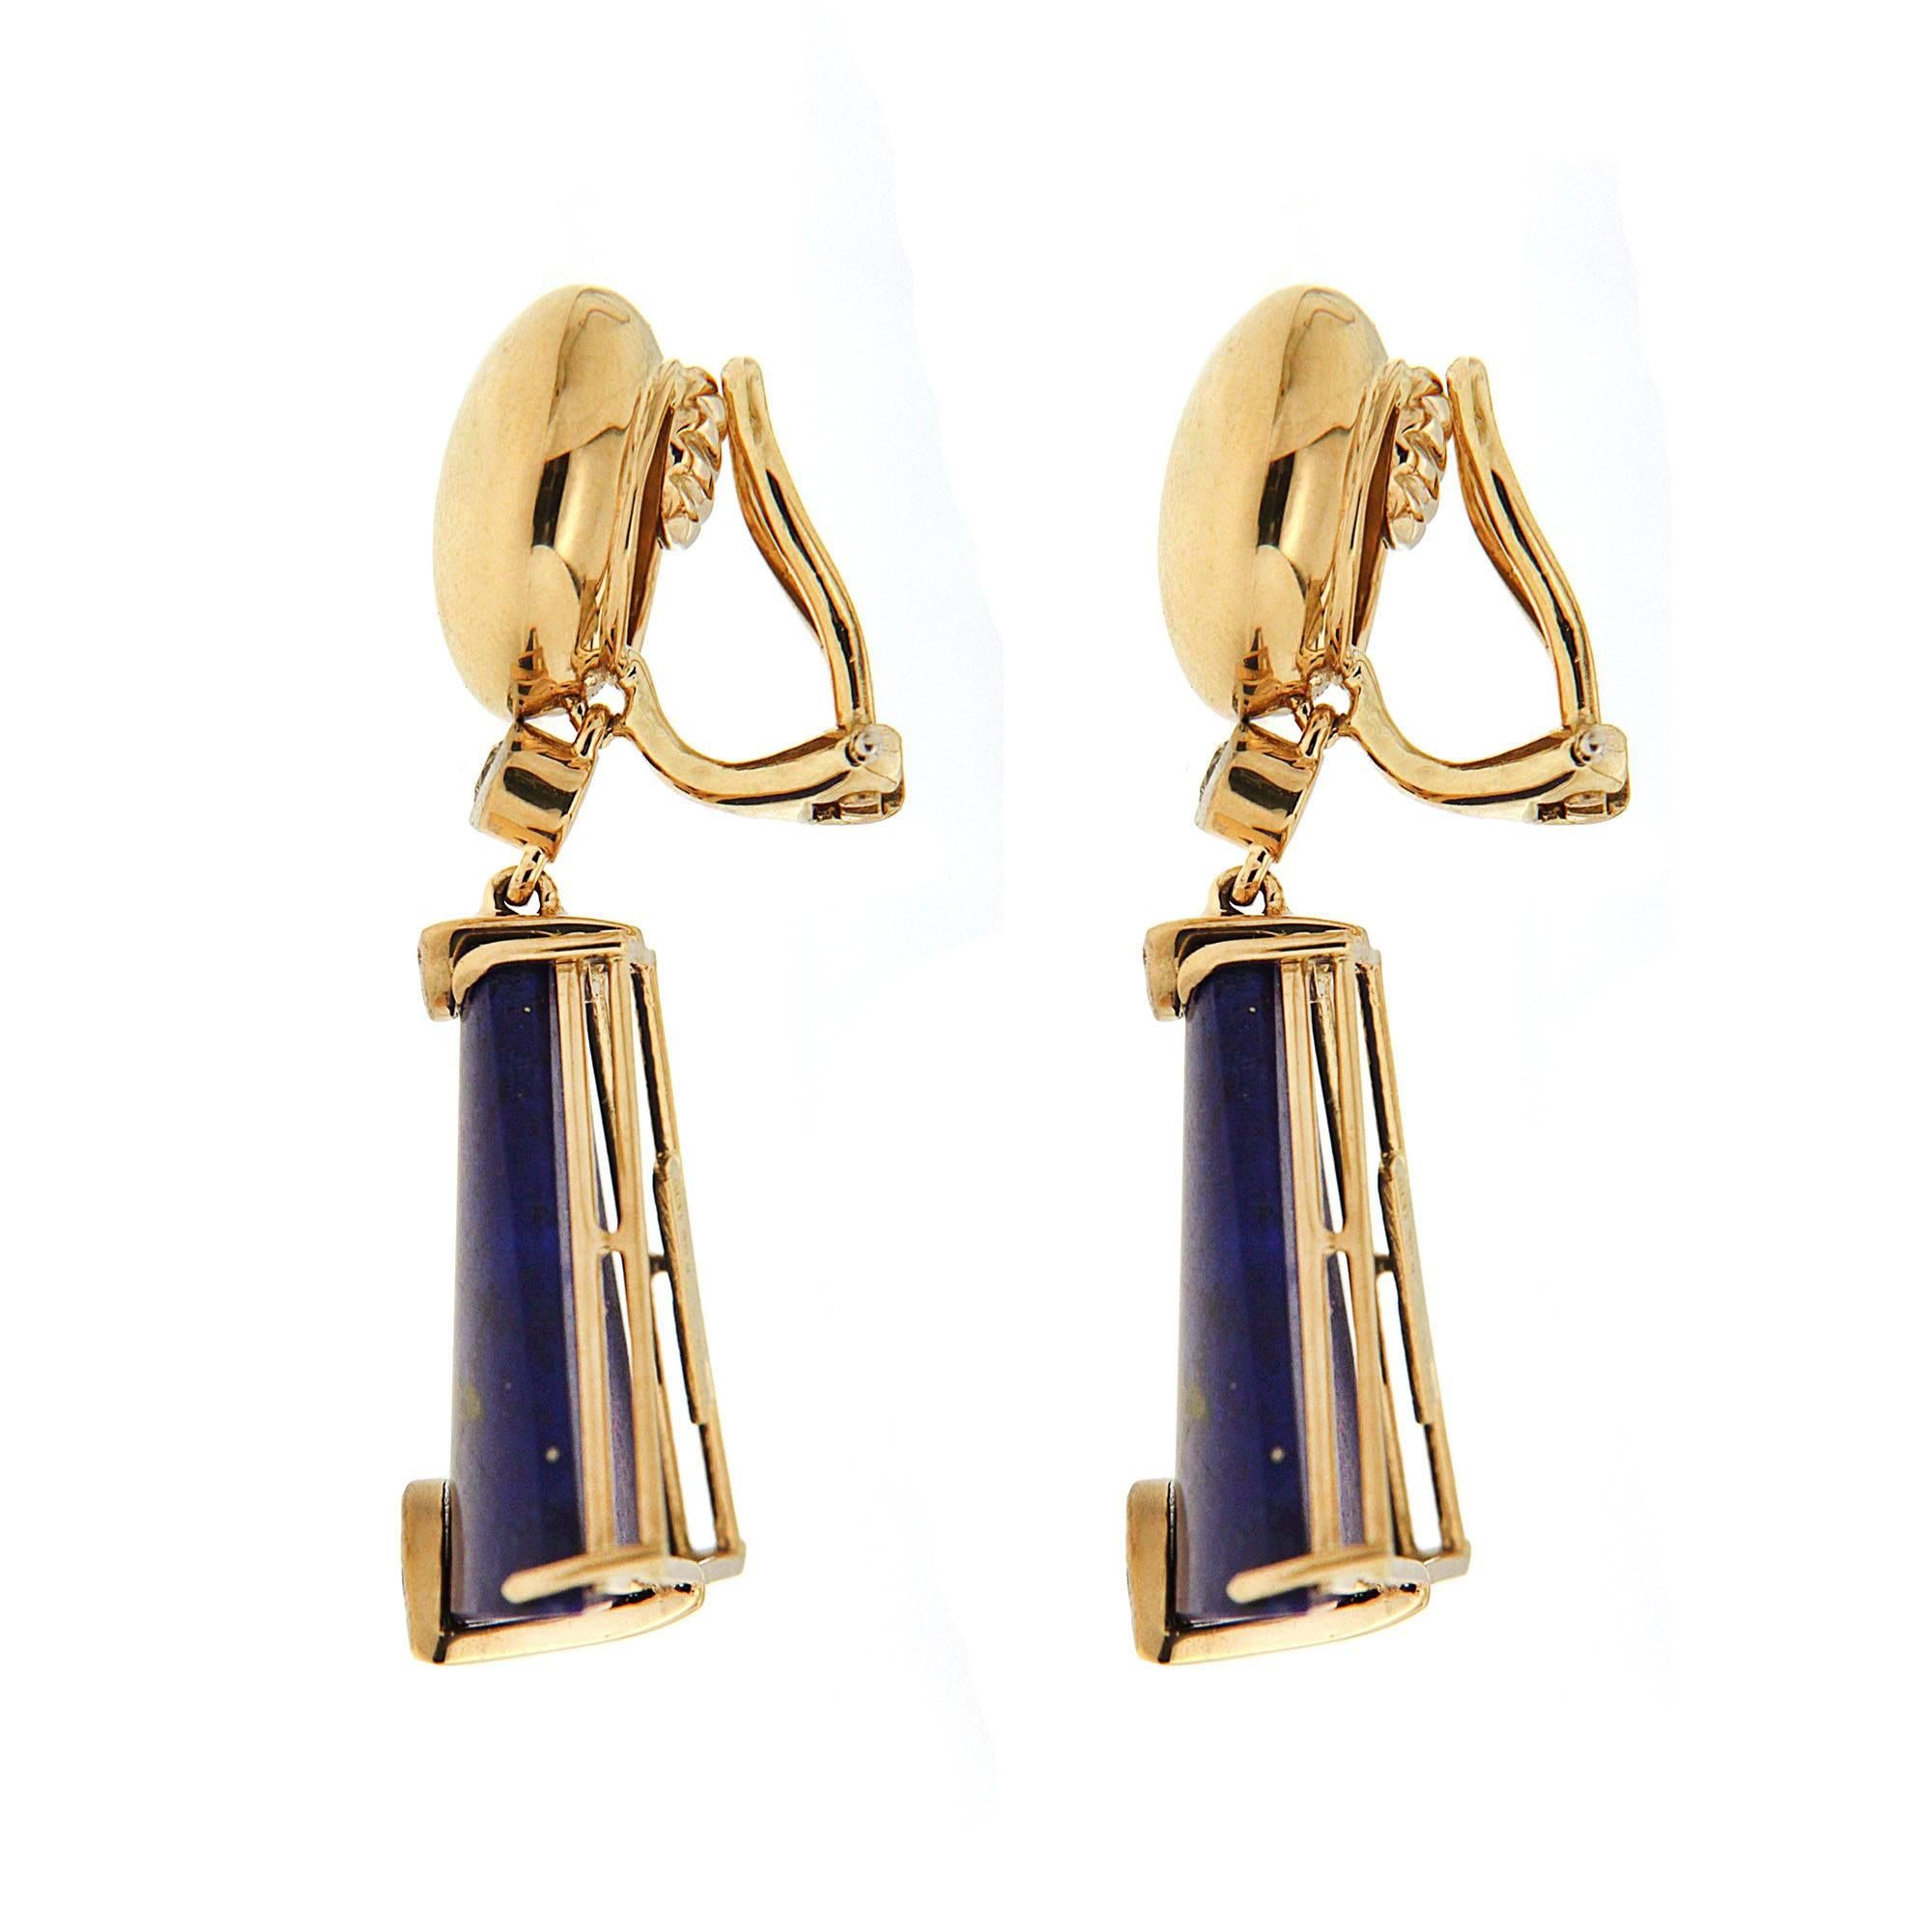 One of the most unique jewelry designs, this pair of earrings features special cut Lapis Lazuli with pave diamonds set with round motif top and clip backs in 18kt yellow gold. The result is a unique jewel and the perfect gift for any occasion.